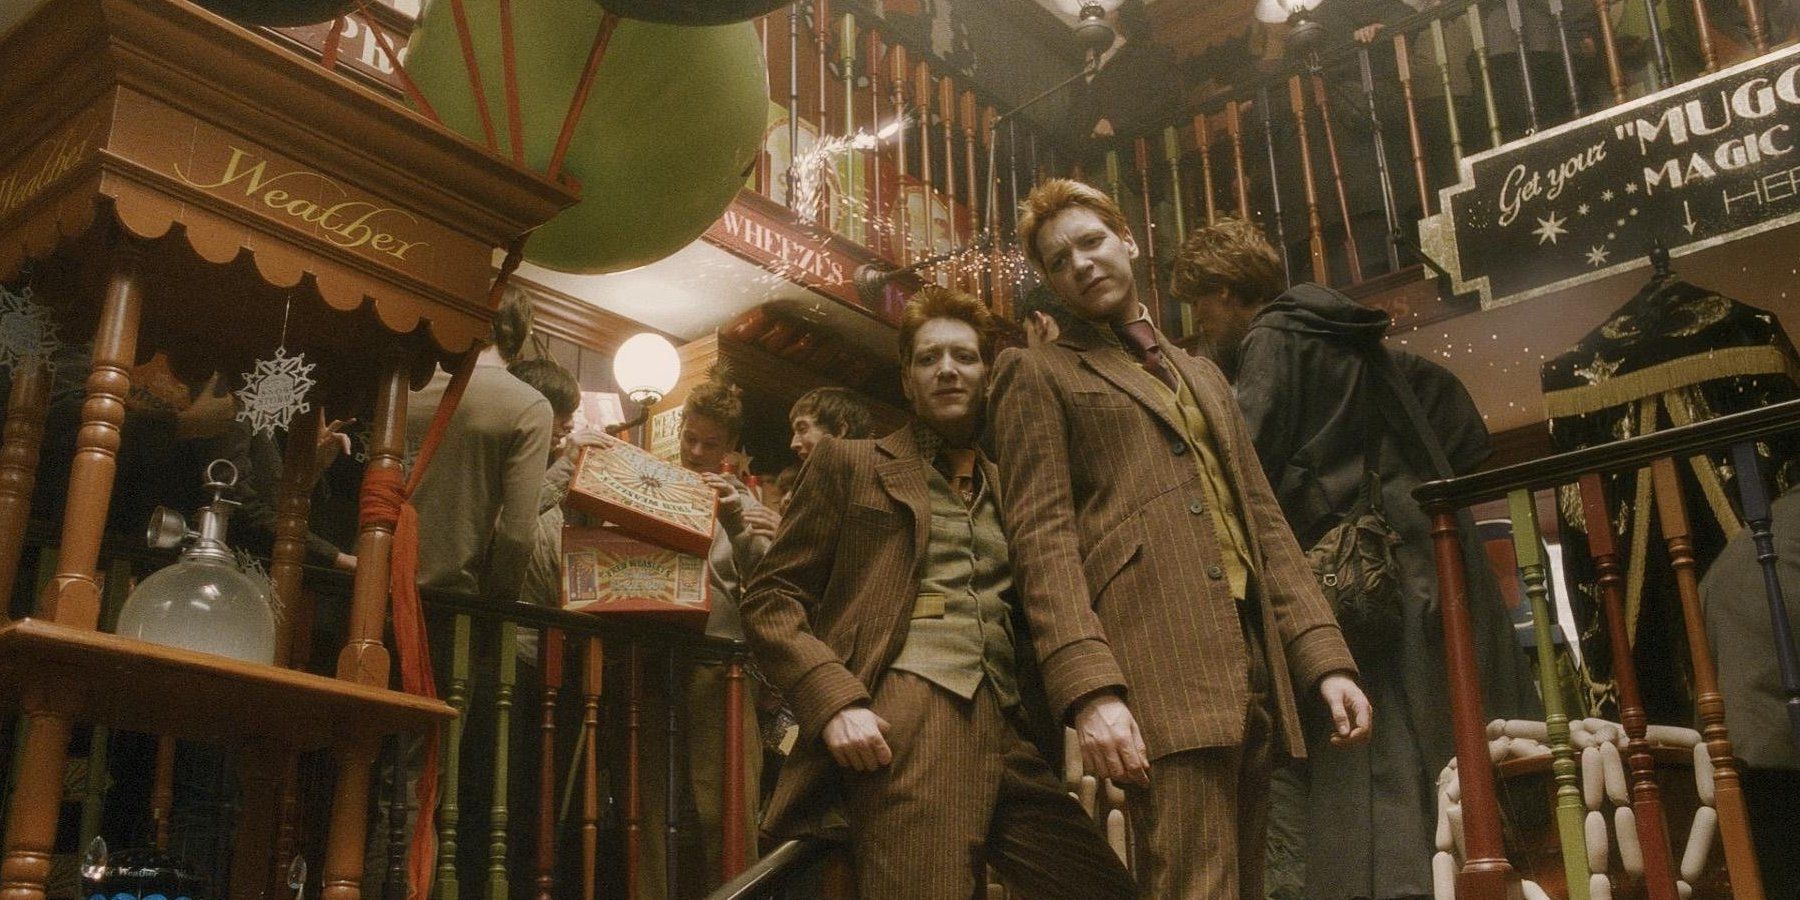 10 Incredible Stores From Diagon Alley The Harry Potter Movies Leave Out